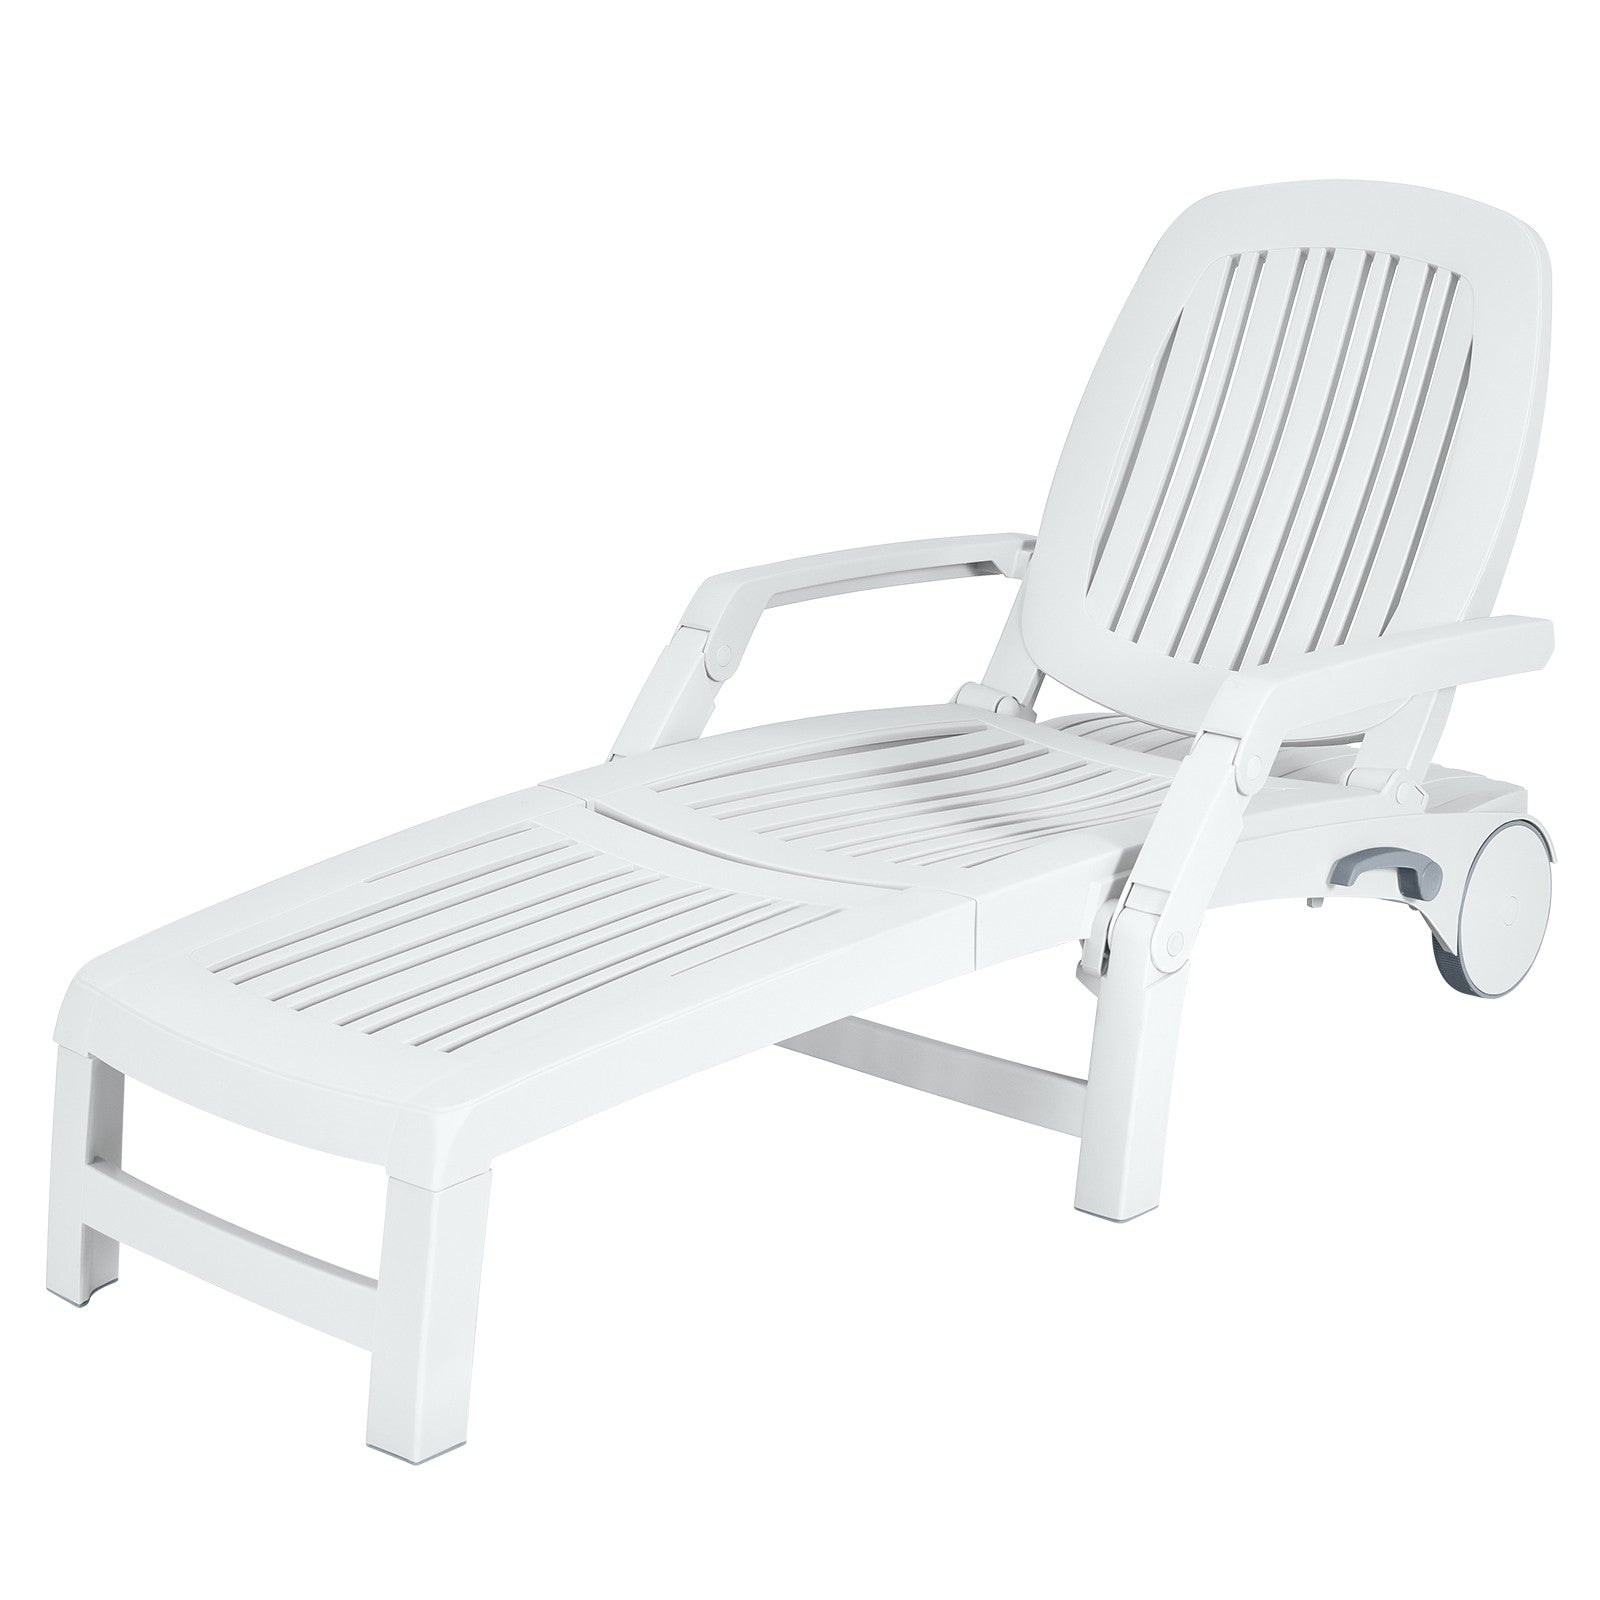 Chaise Lounge Outdoor,Foldable Sun Lounger with Wheels - Giantexus